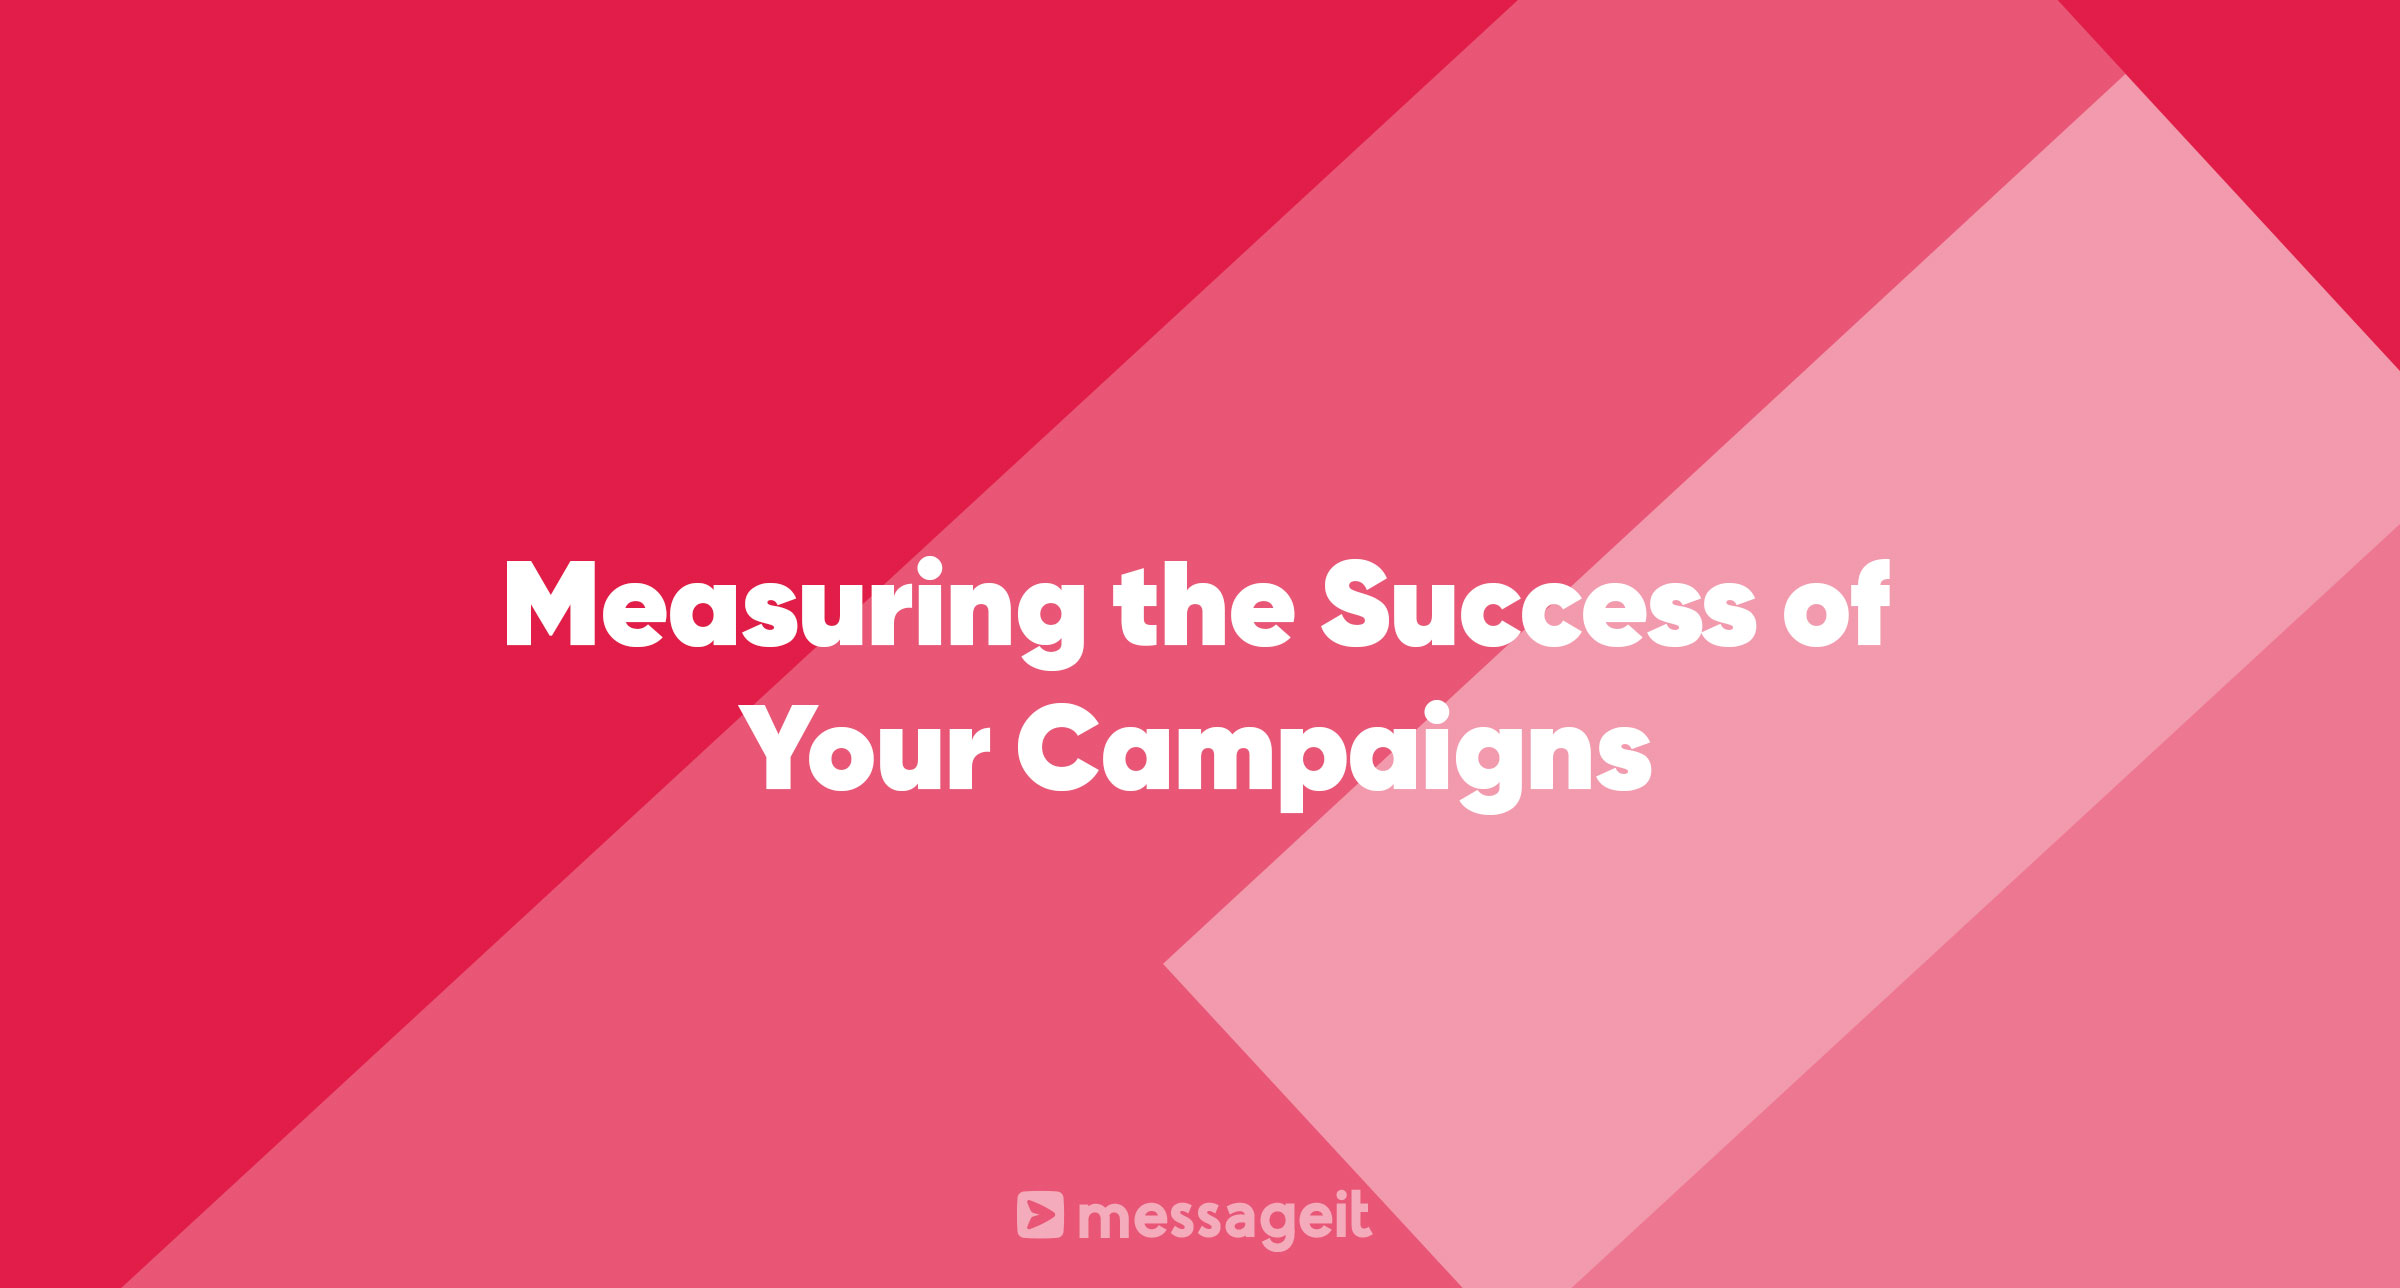 Article | Measuring the Success of Your Campaigns